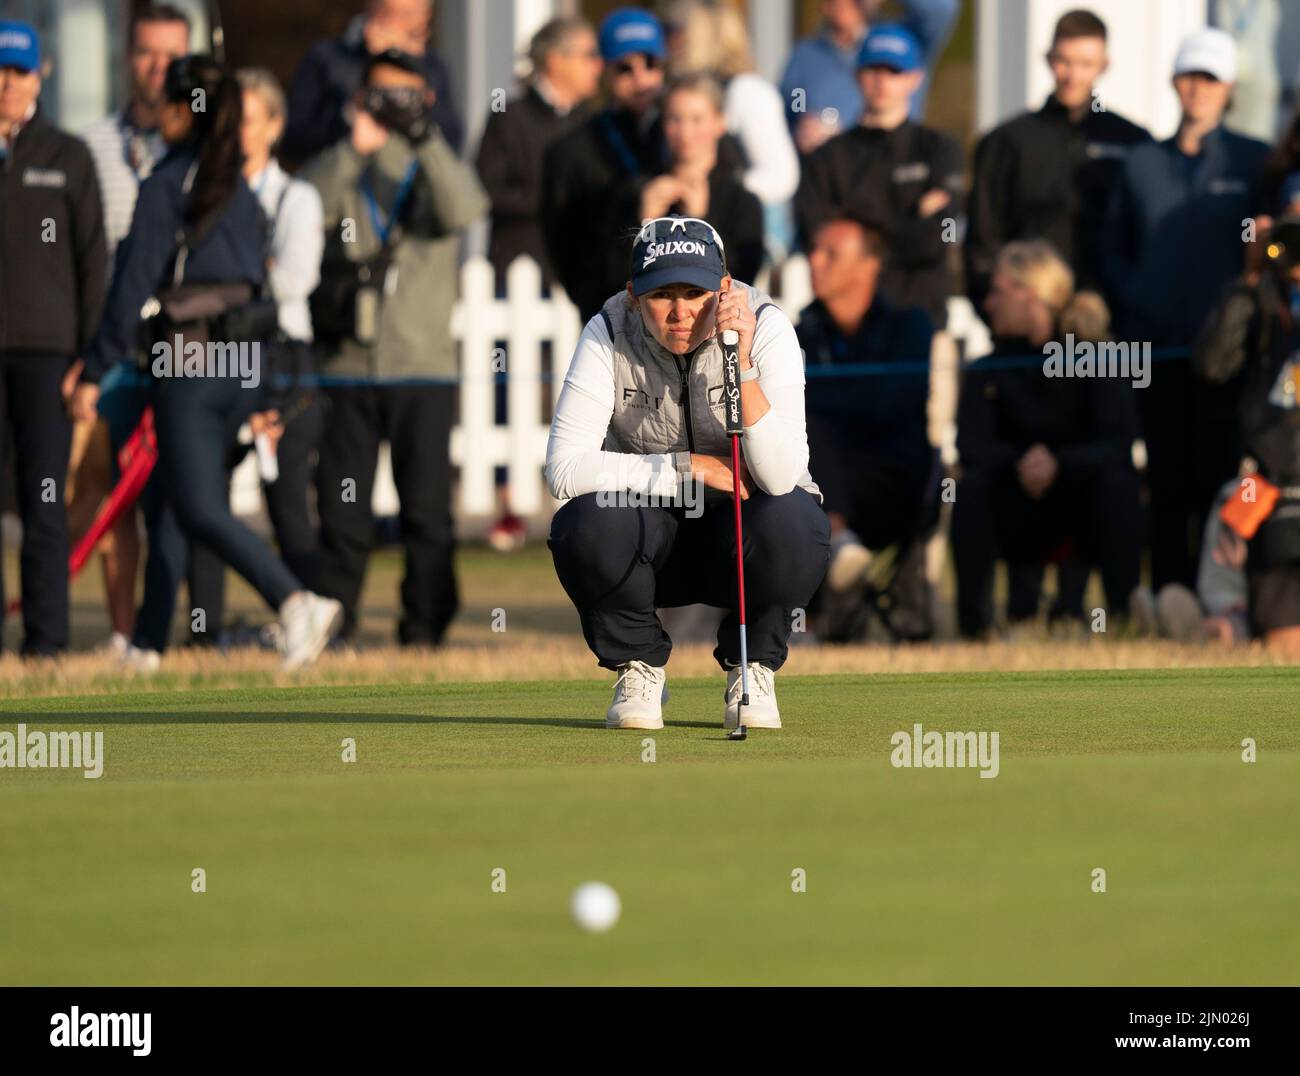 Gullane, Scotland, UK. 7th August 2022. Final  round of the AIG Women’s Open golf championship at Muirfield in Gullane, East Lothian. Pic; Ashleigh Buhai lines up her putt on the 18th green.  Iain Masterton/Alamy Live News Stock Photo